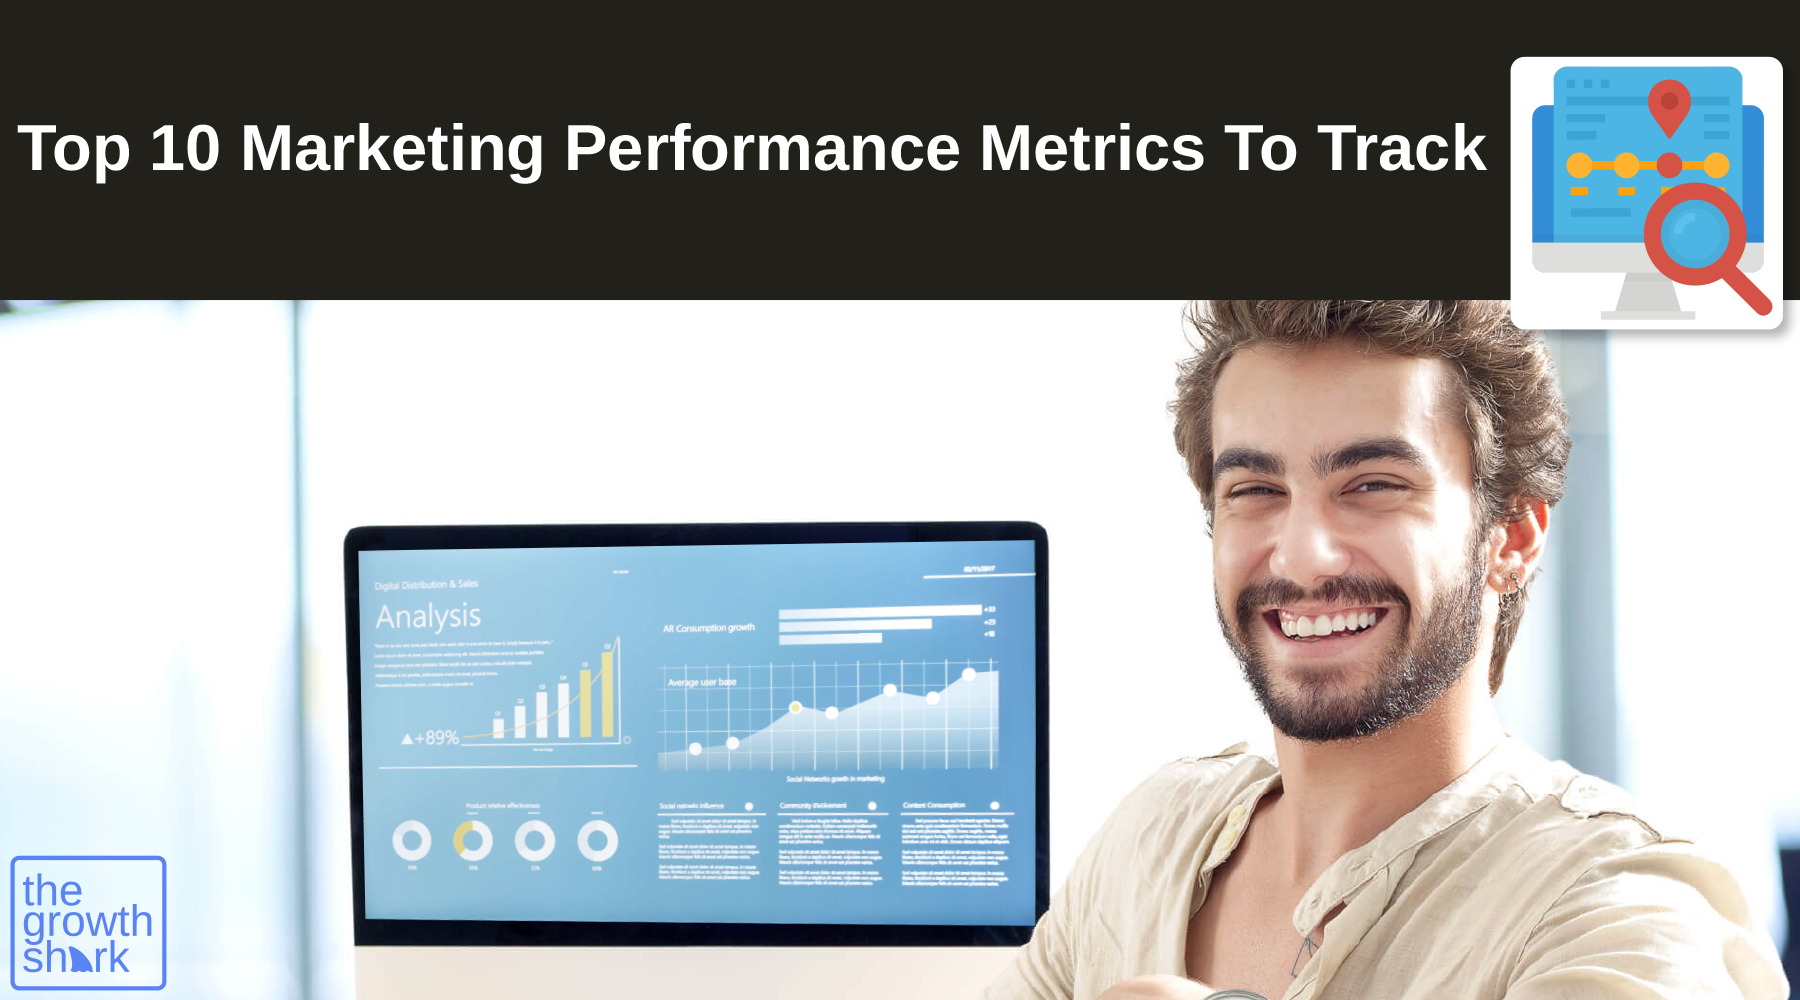 10 Marketing Performance Metrics All Marketers Should Be Tracking Closely